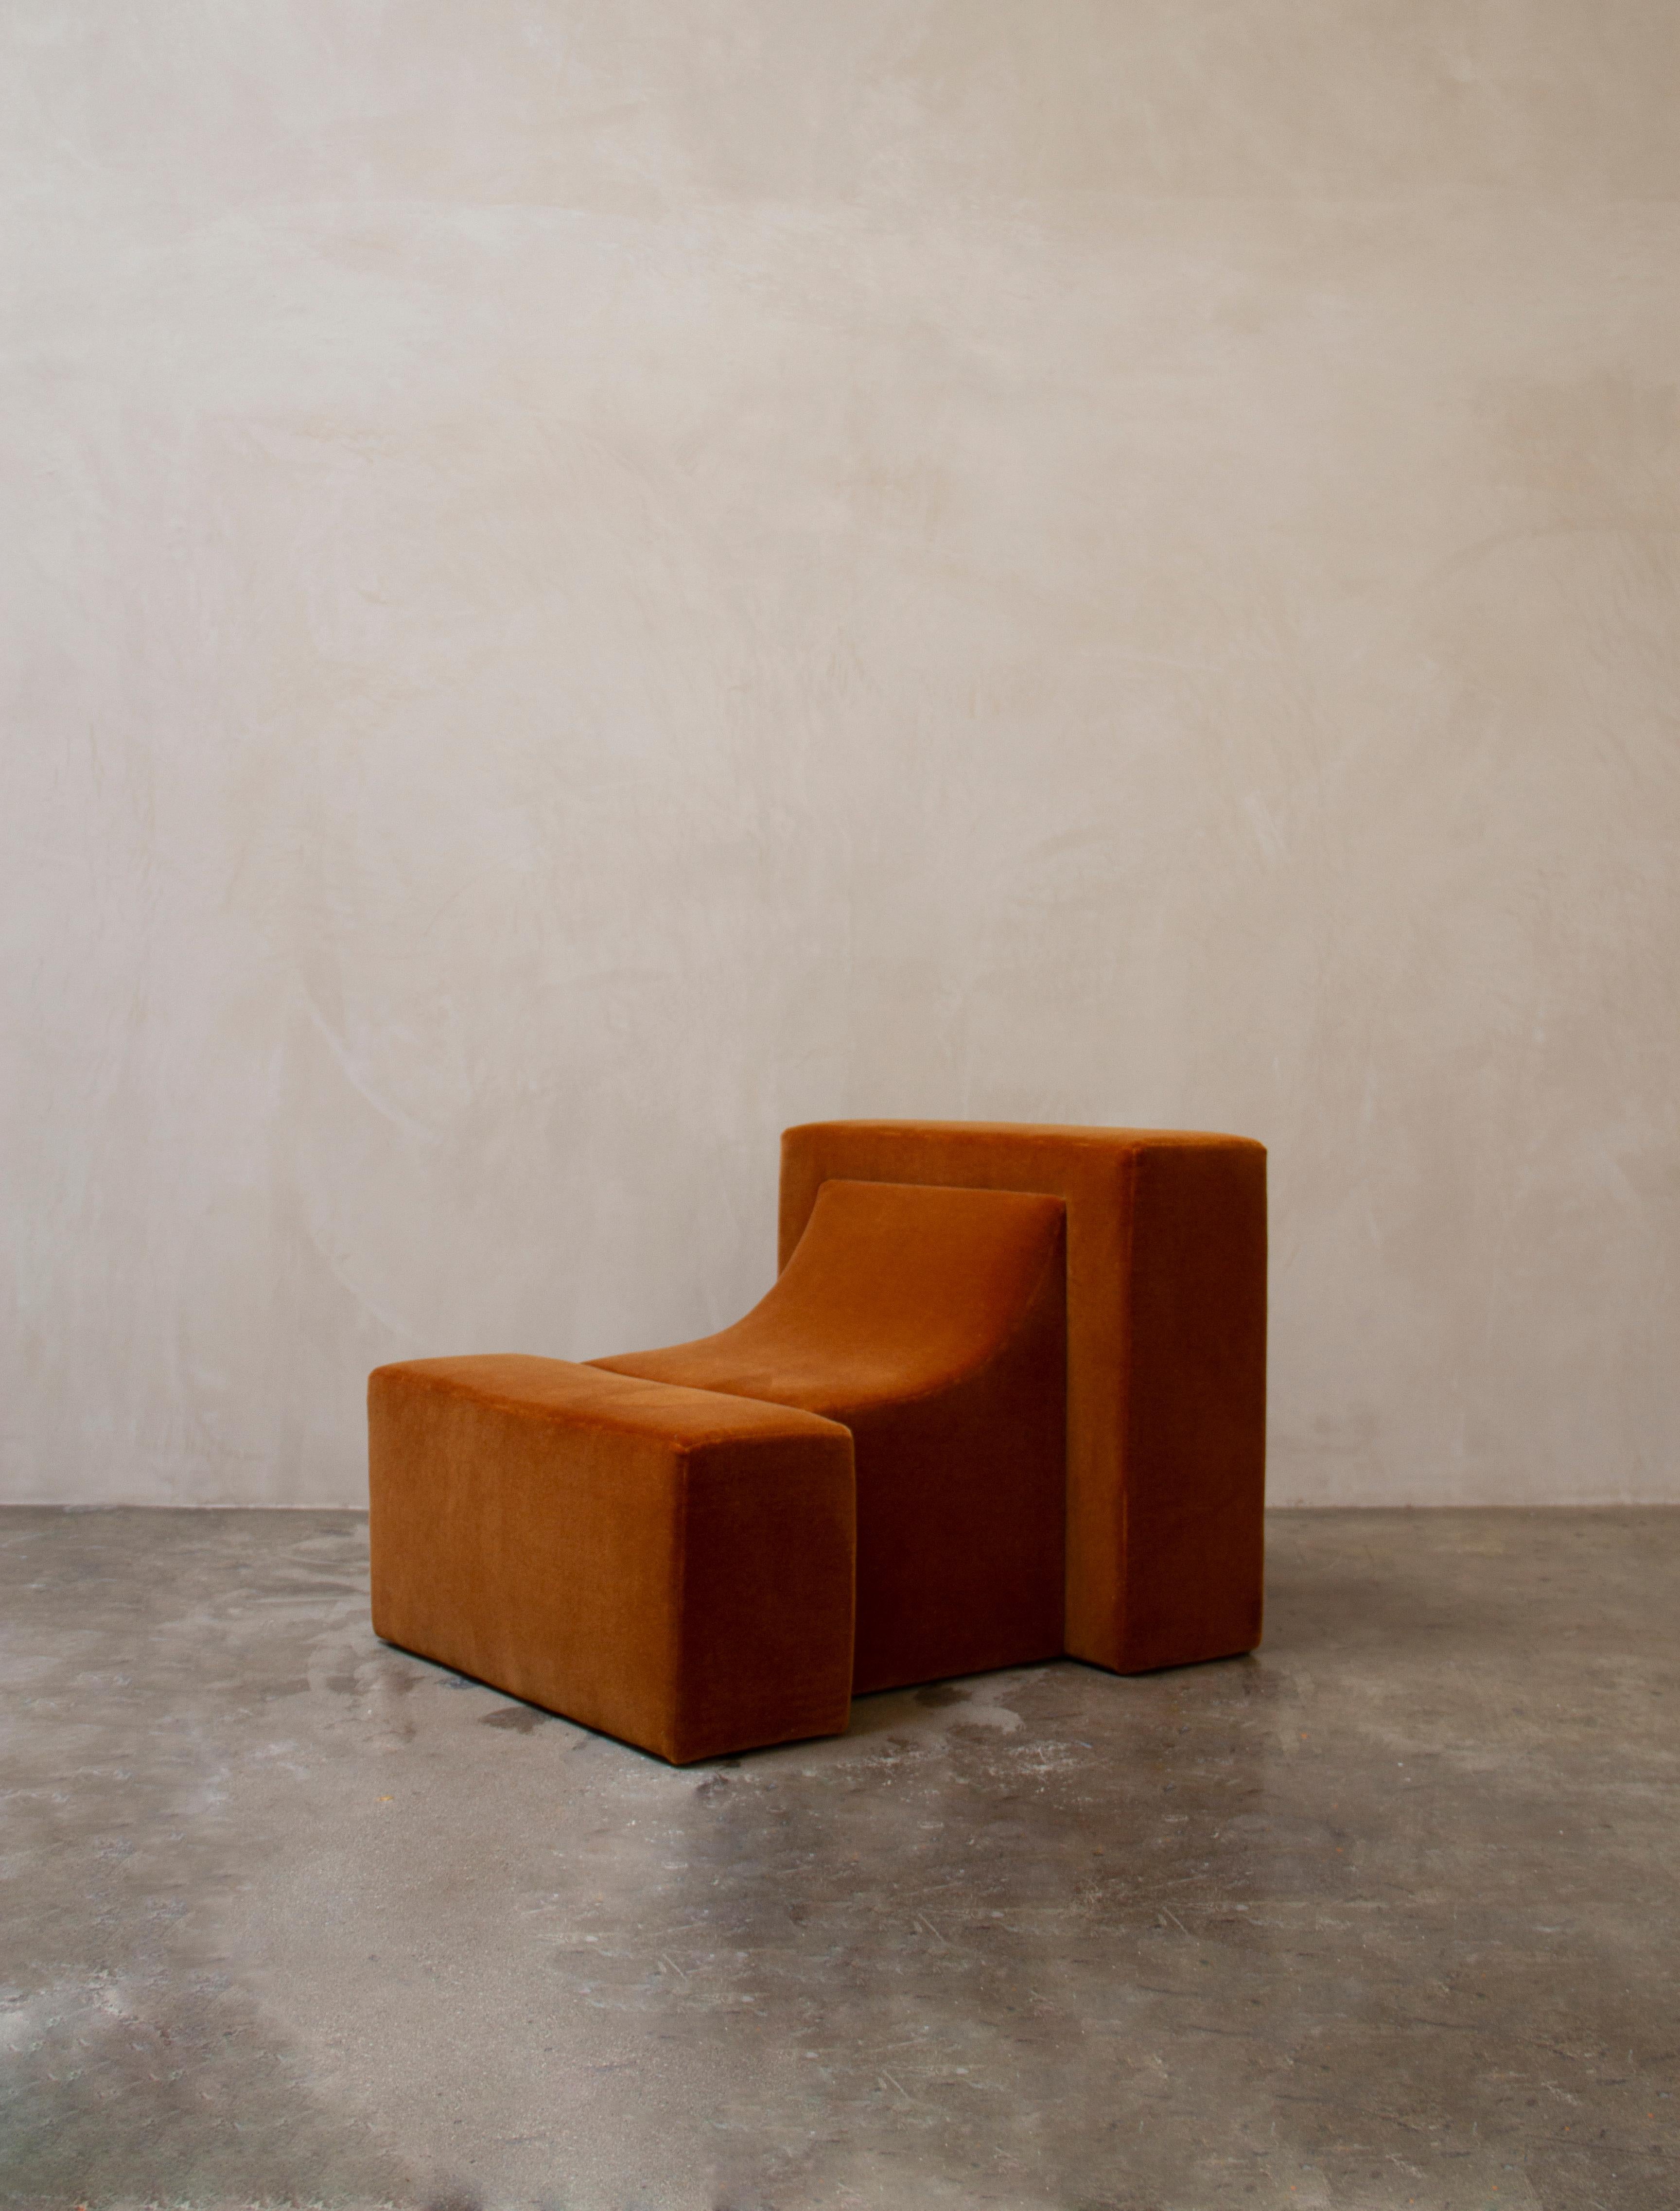 Block chair by Estudio Persona
Dimensions: W 76.2 x D 91.44 x H 66.04 cm
Materials: Mohair Fabric

Upholstered lounge chair. Shown in mohair fabric.
Also available in COM.
Customizations available.

Estudio Persona was created by Emiliana Gonzalez